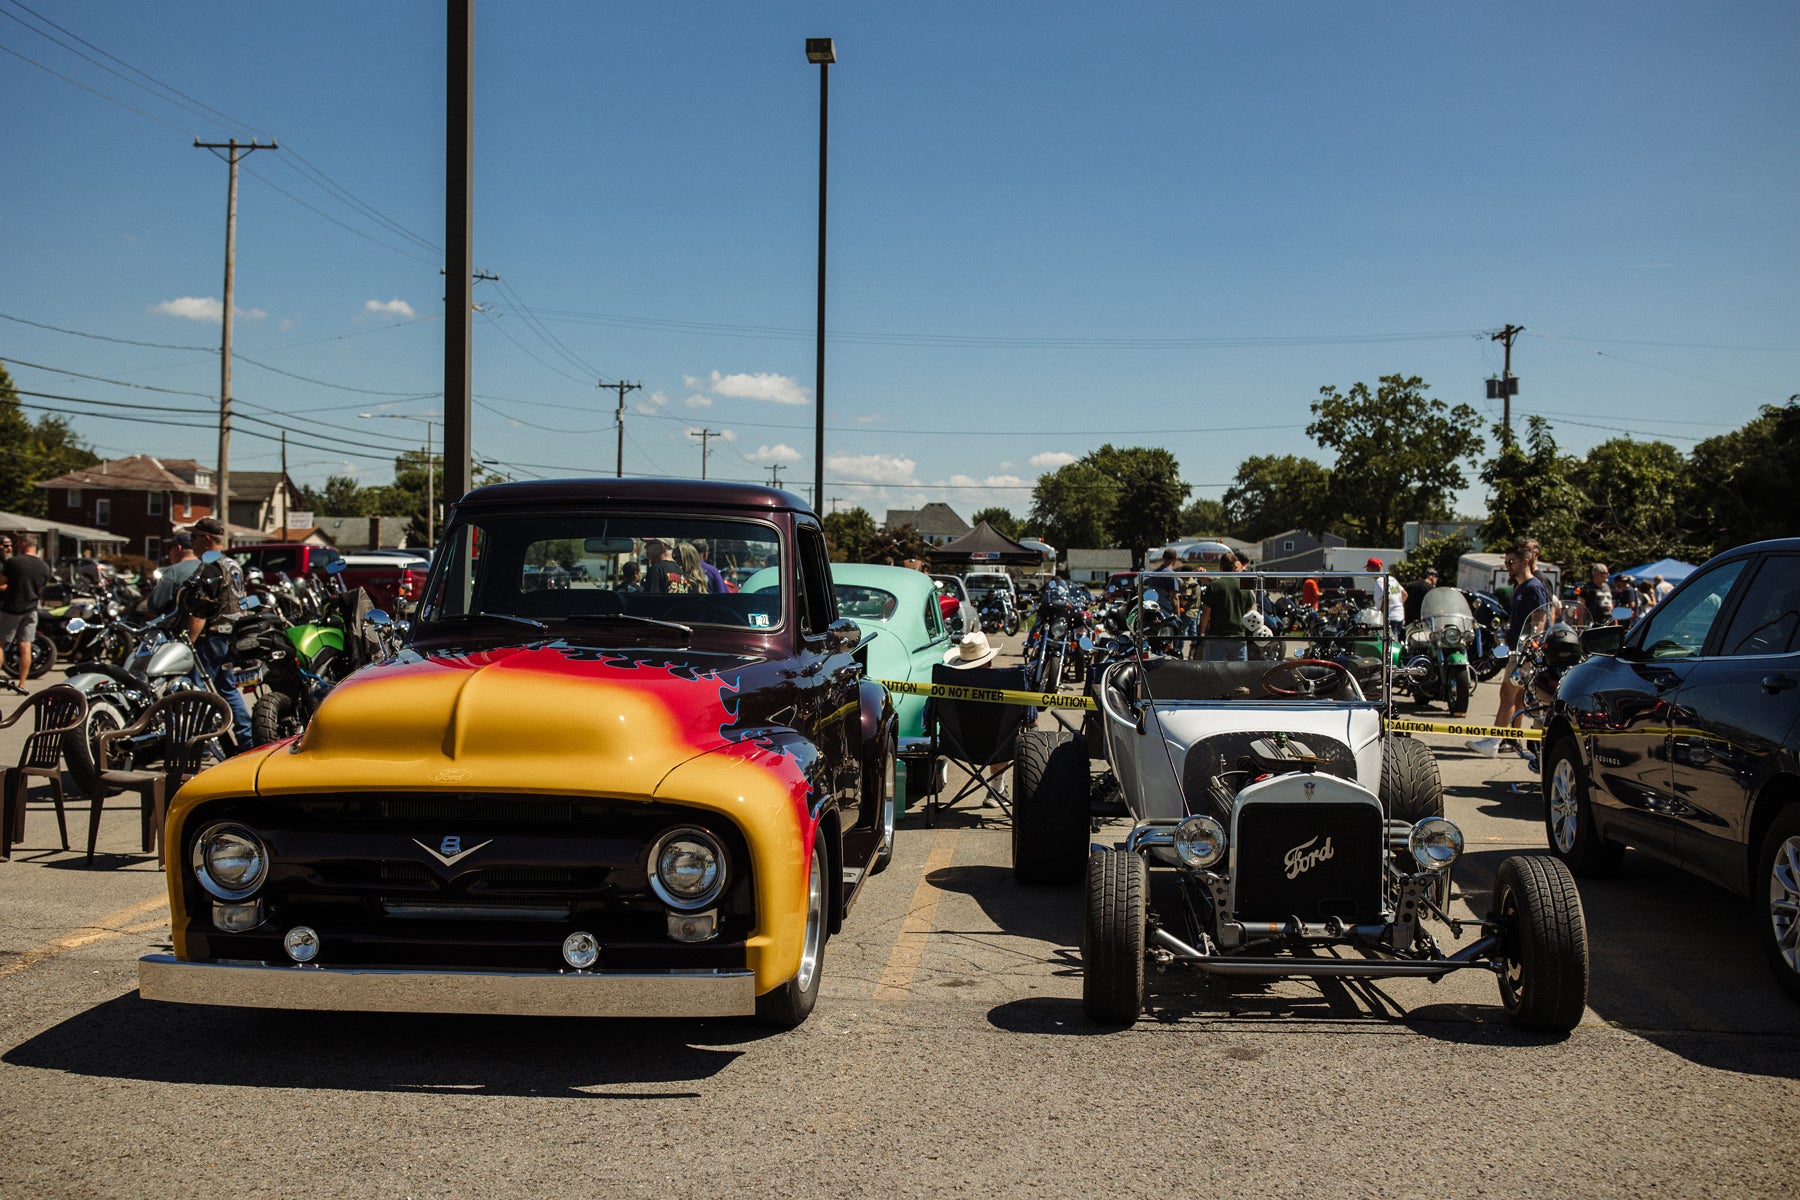 Steel City Mods vs Rockers Pittsburgh motorcycle event show Paradise Island